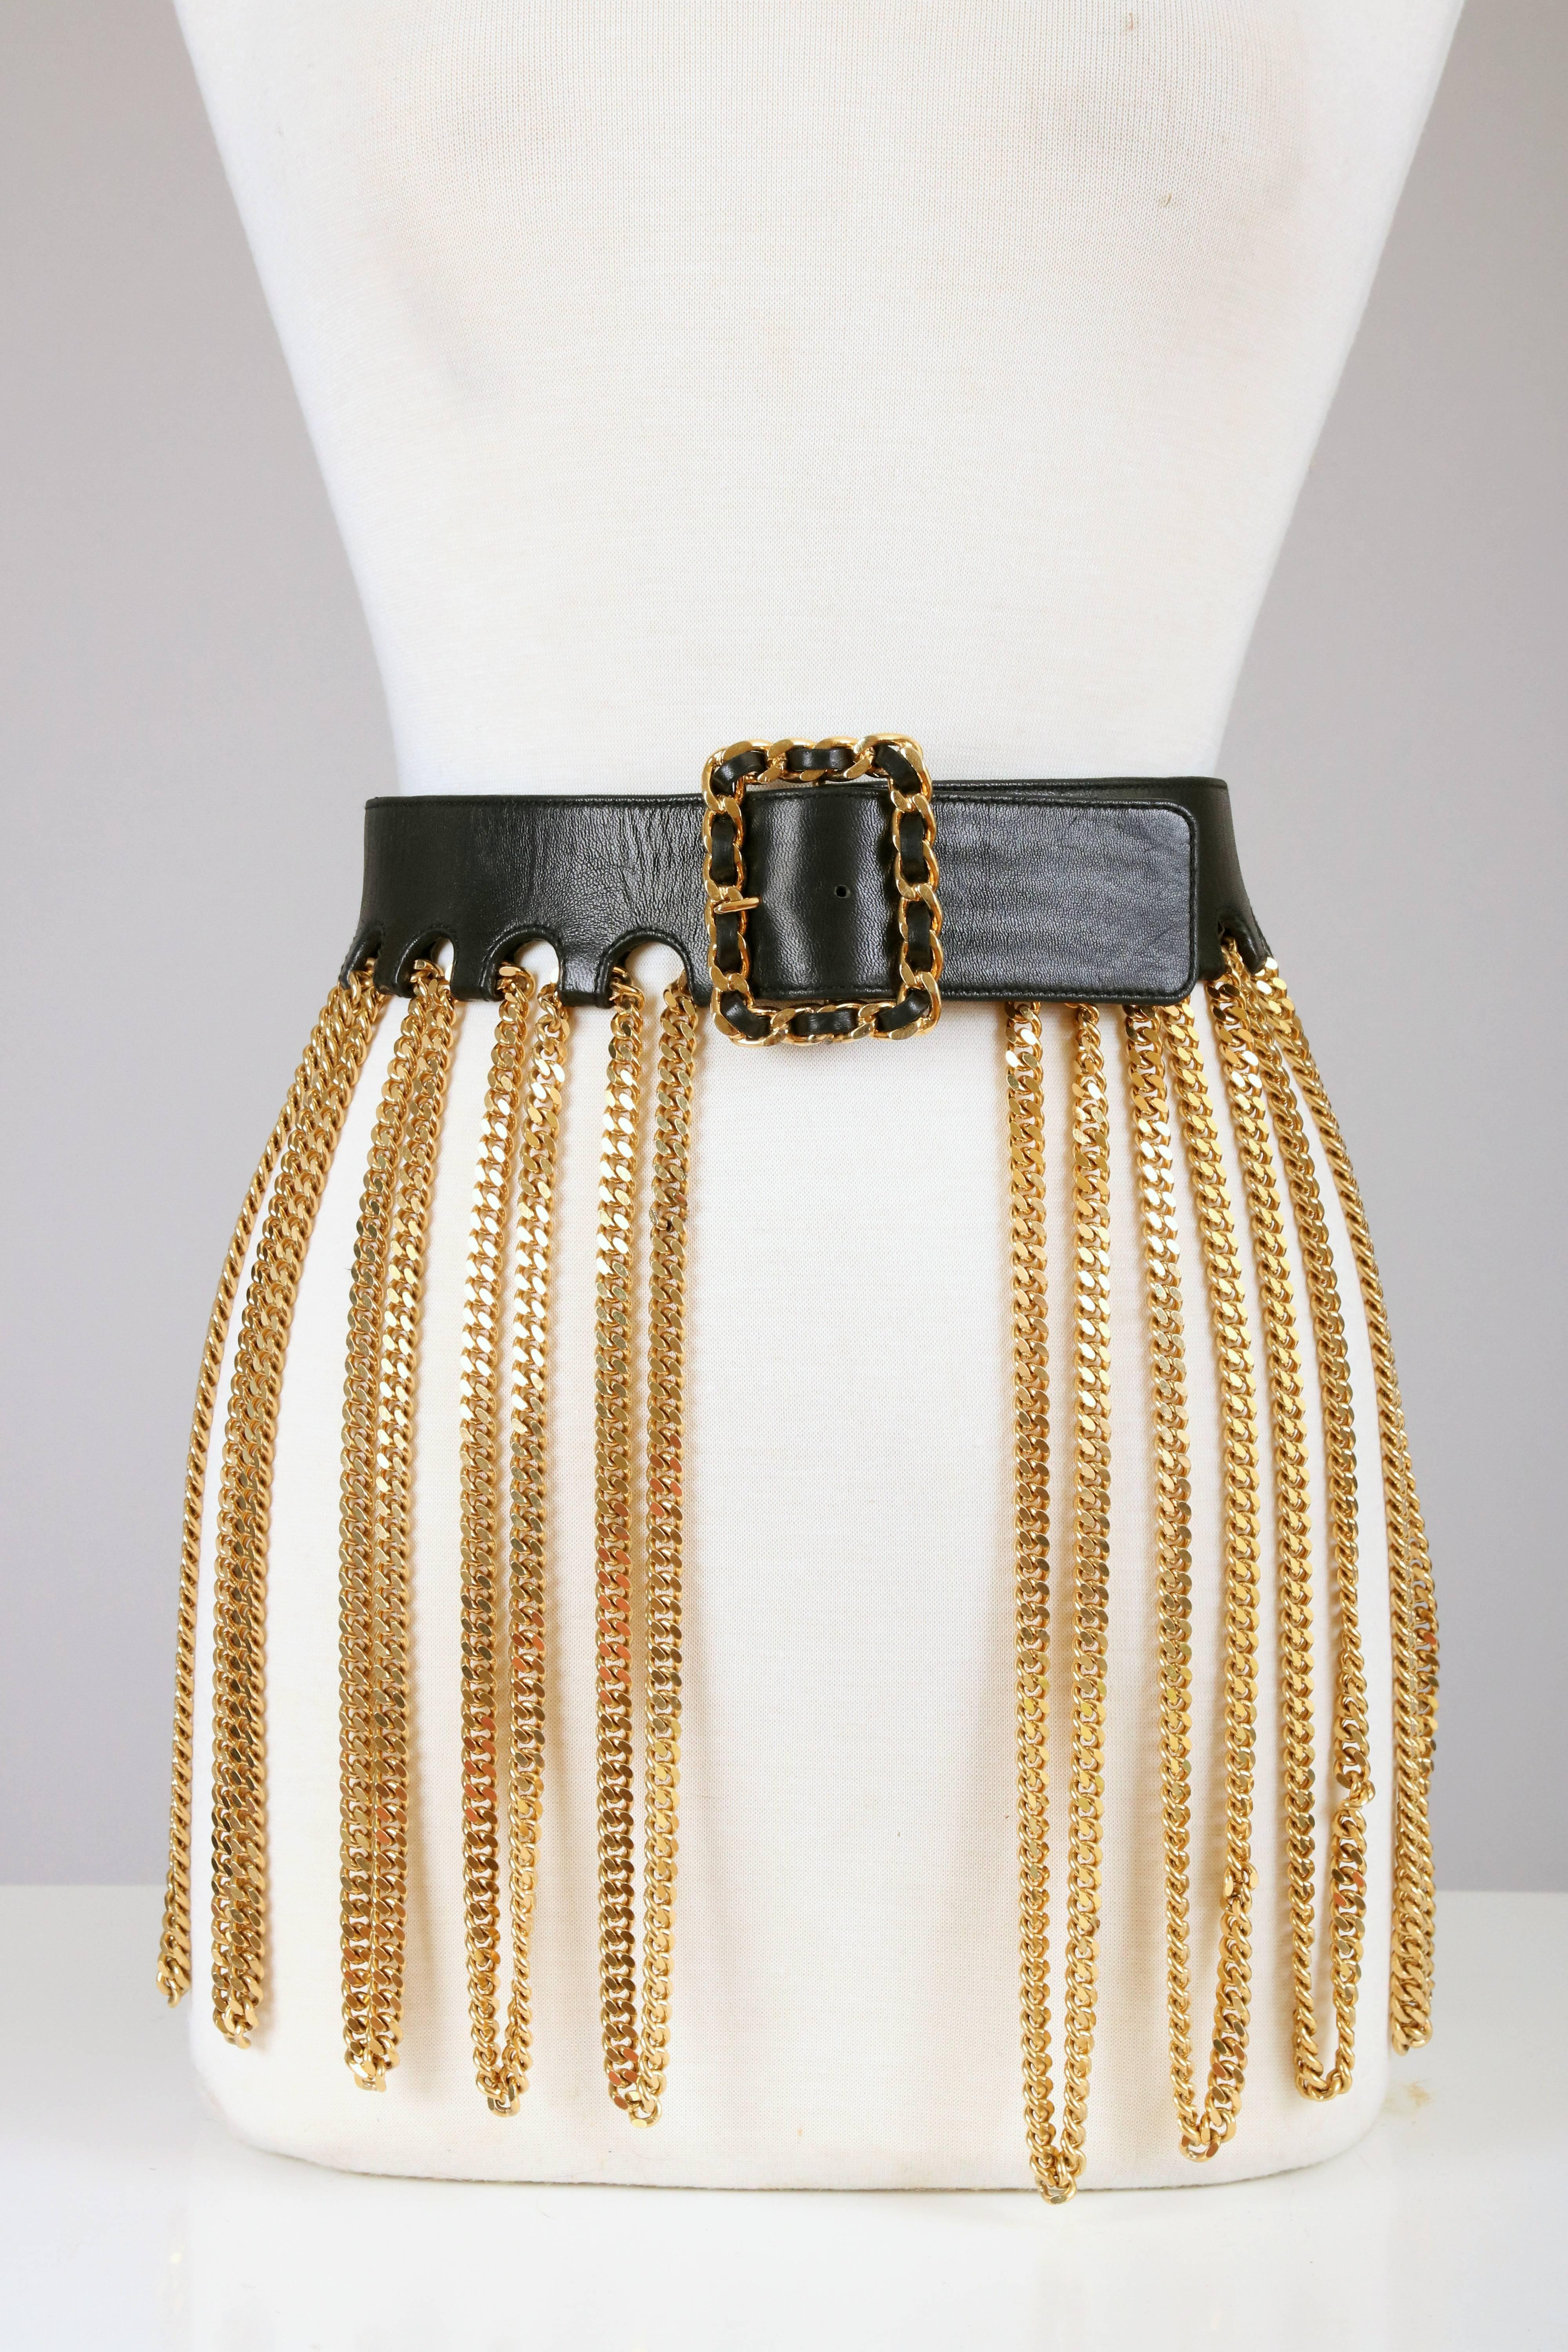 Iconic Chanel vintage black leather and chain belt with buckle made from gold metal hardware and woven black leather. Worn in famous editorial with Linda Evangelista. 
MEASUREMENTS:
Belt Length - 32 1/2